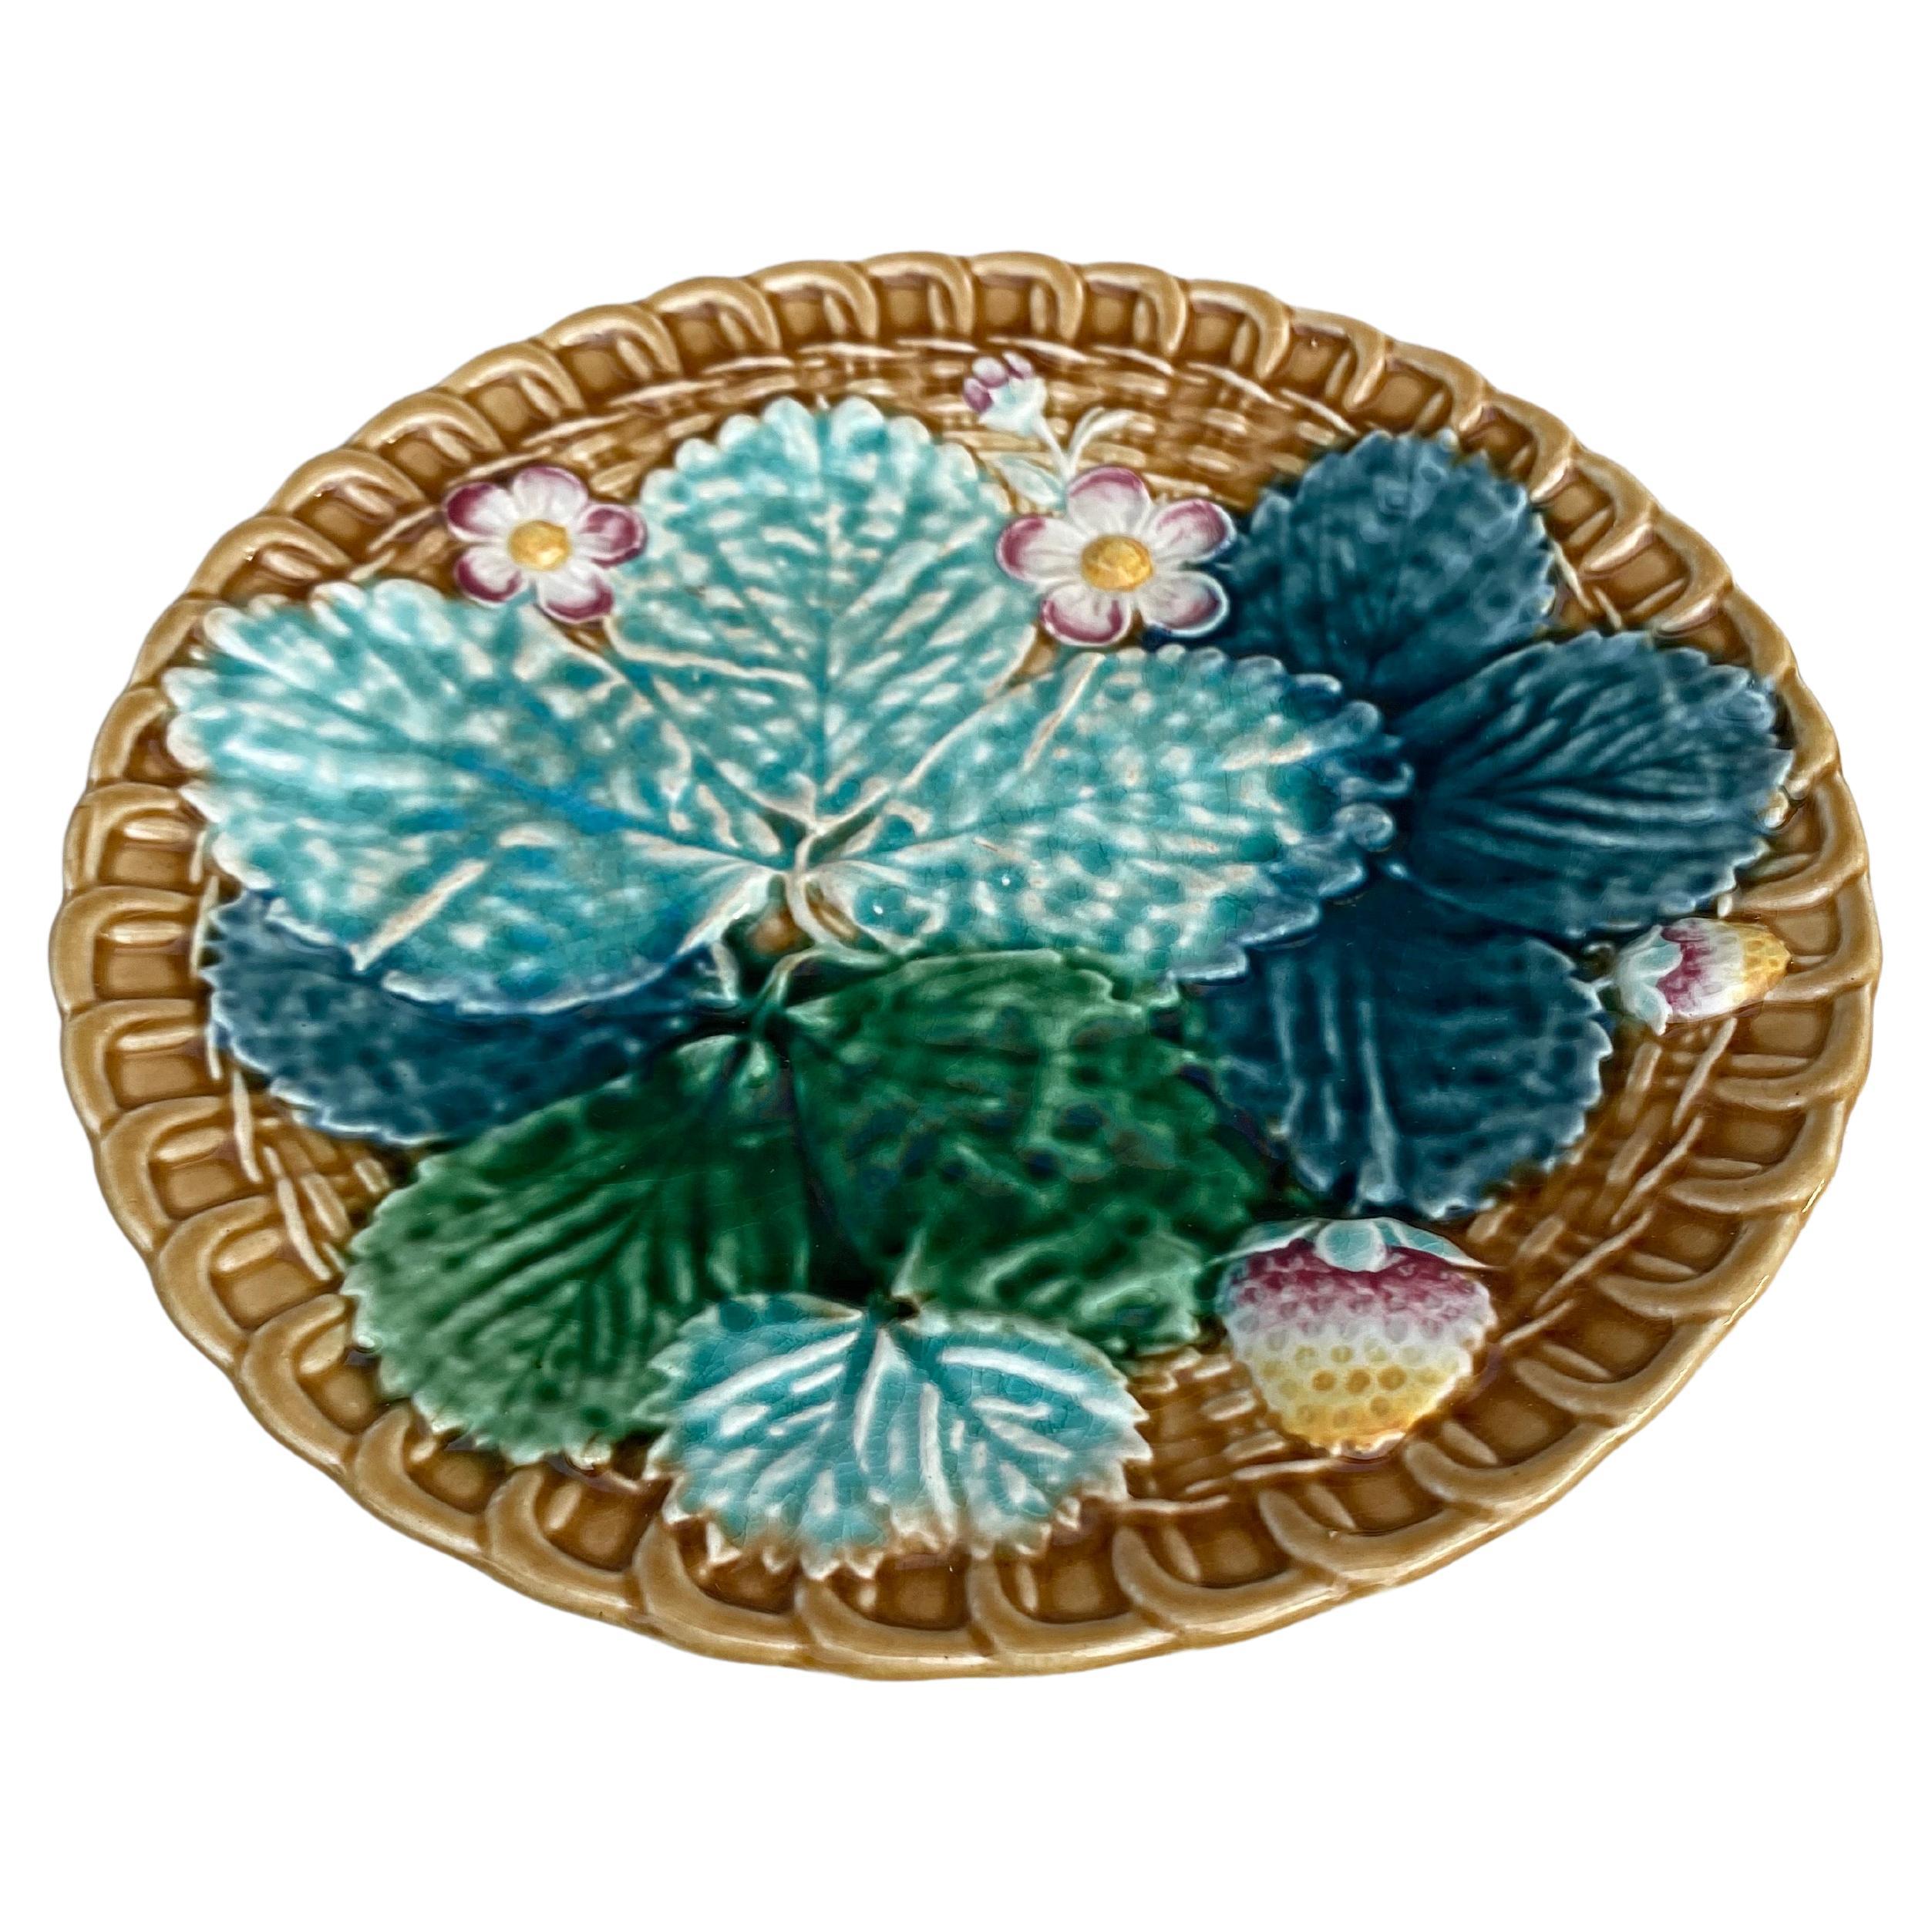 Majolica Strawberries Plate Clairefontaine attributed to Clairefontaine, circa 1890.